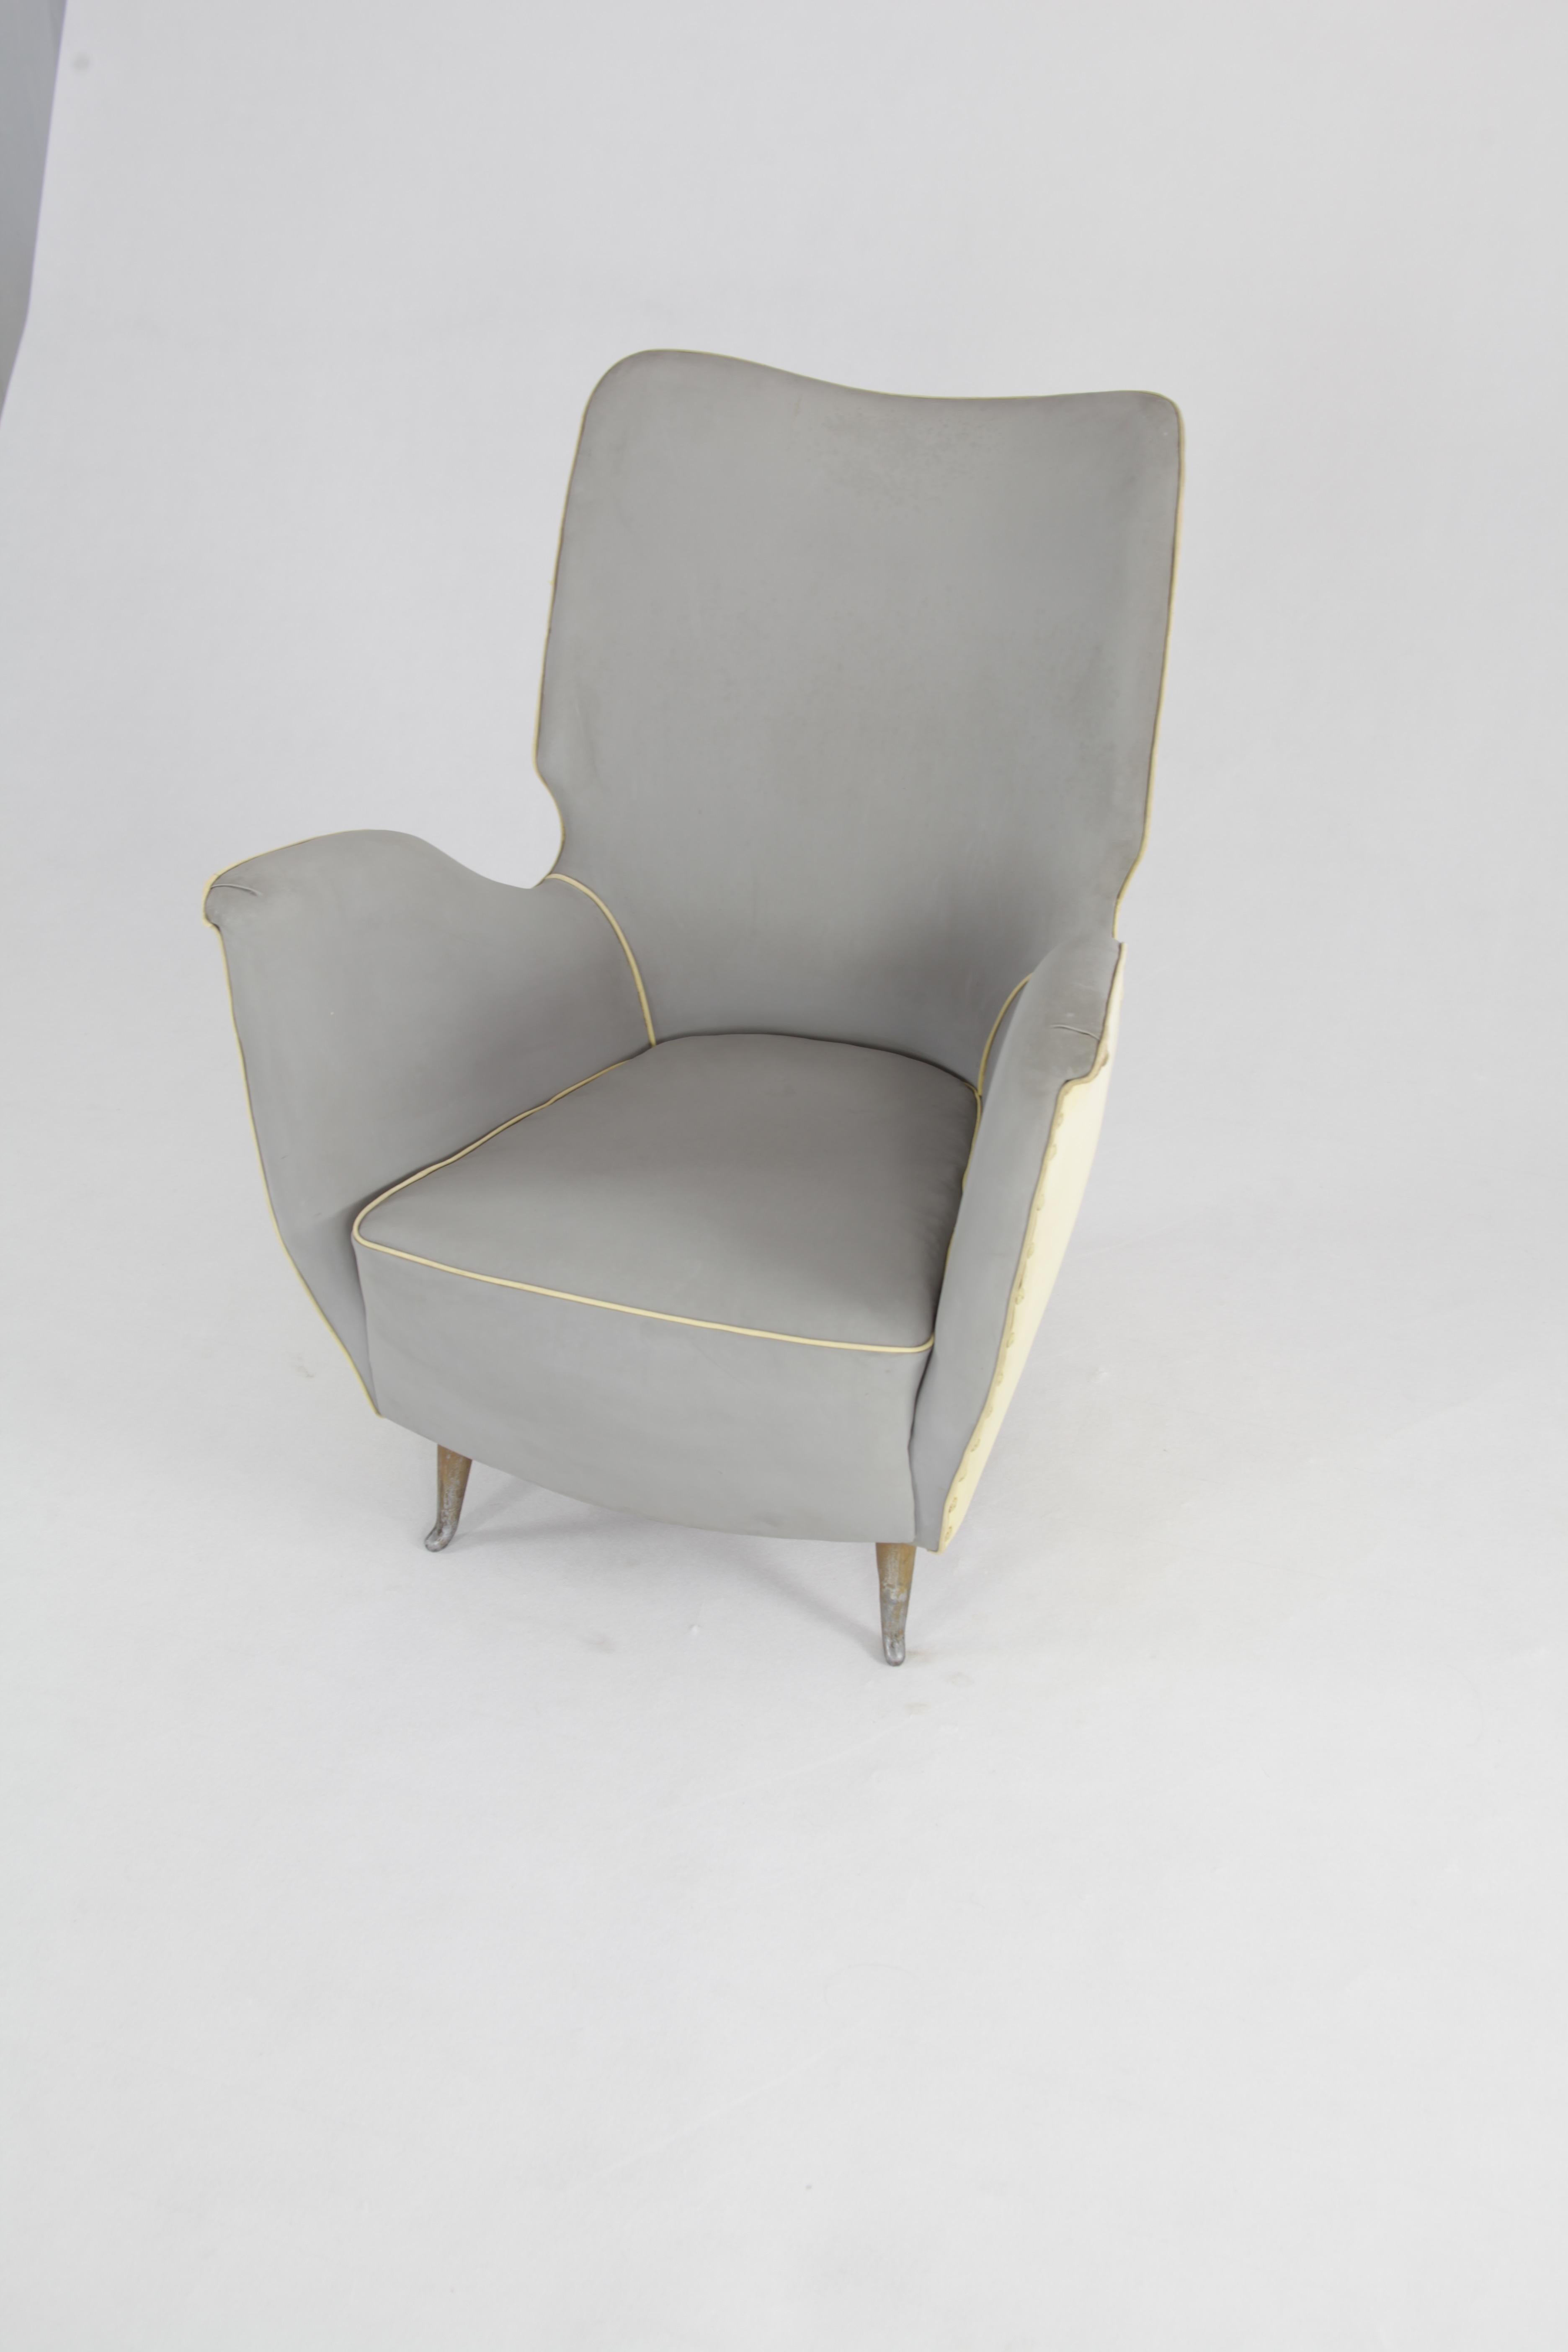 Mid-20th Century Chairs with Two-Tone Cover, Manufactured by I.S.A. Bergamo, 1950s For Sale